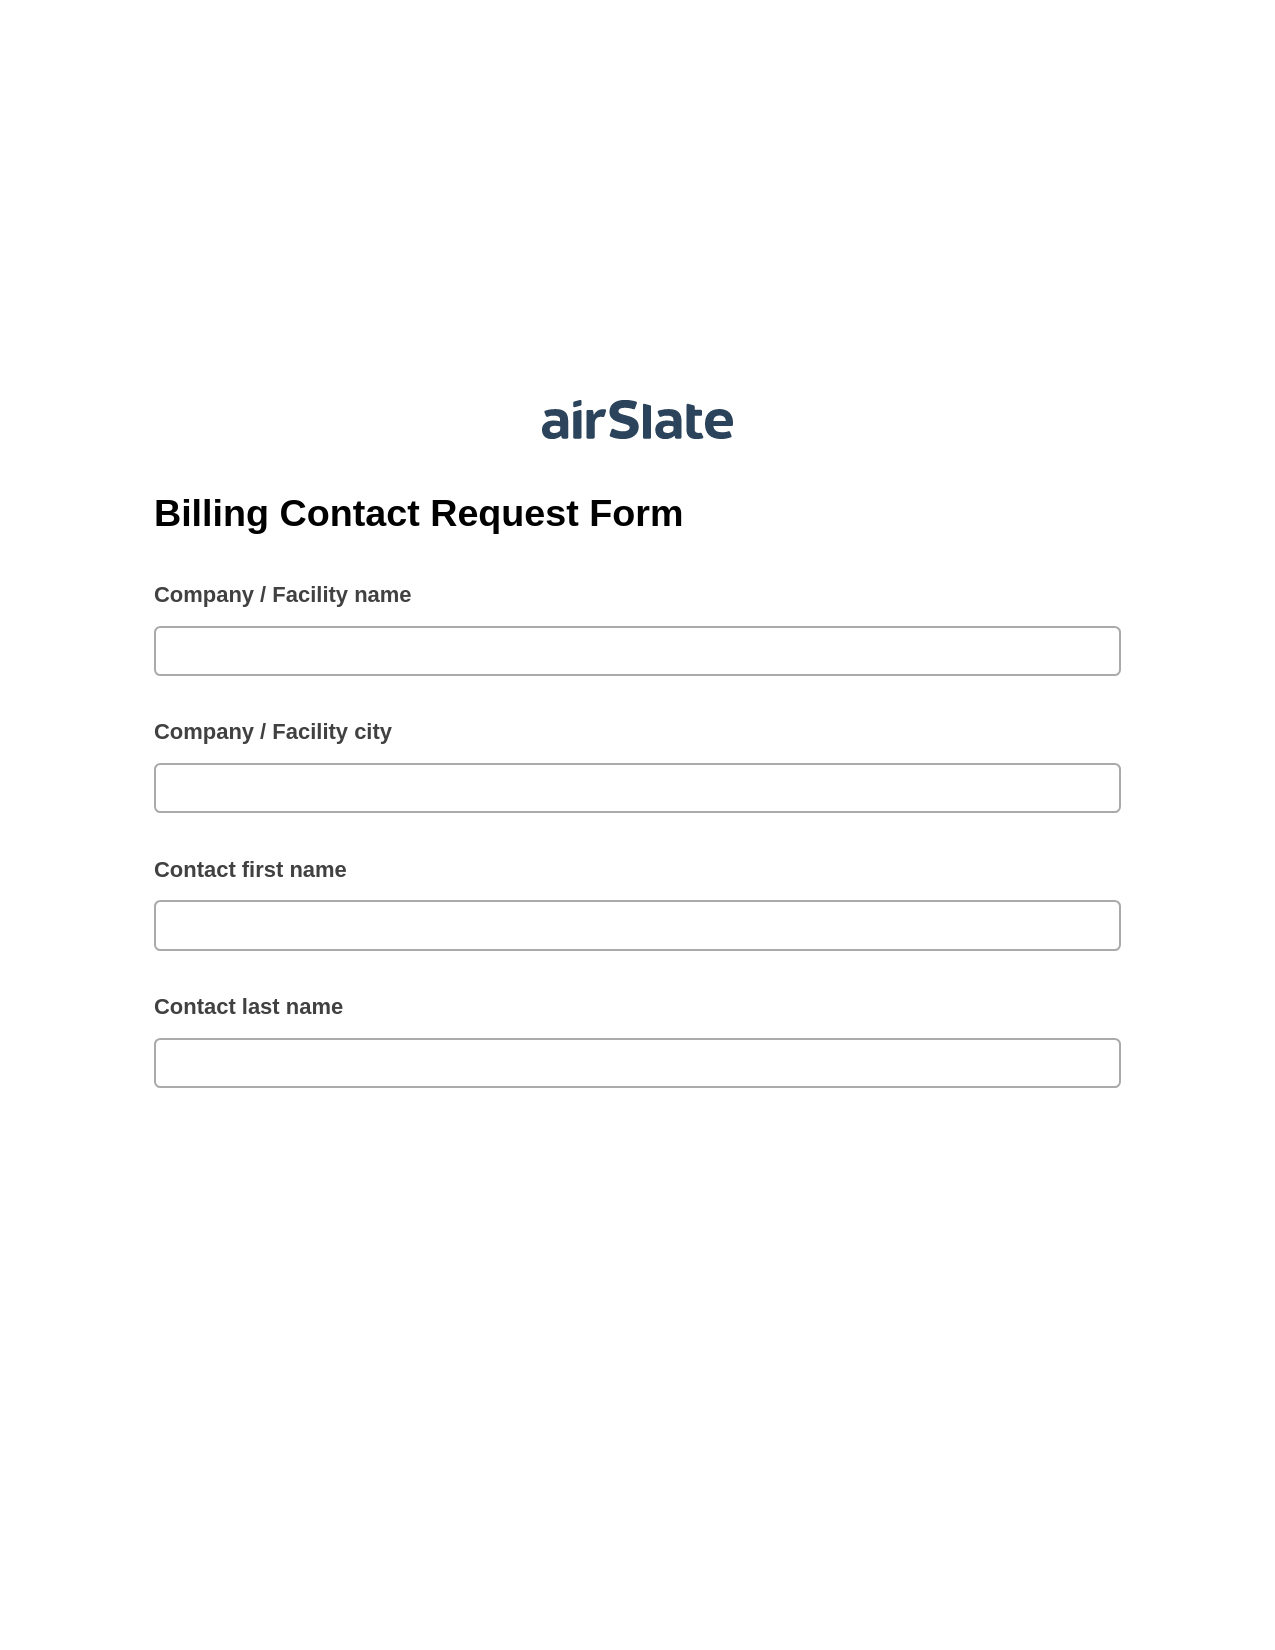 Multirole Billing Contact Request Form Pre-fill from NetSuite Records Bot, Update NetSuite Records Bot, Export to MySQL Bot